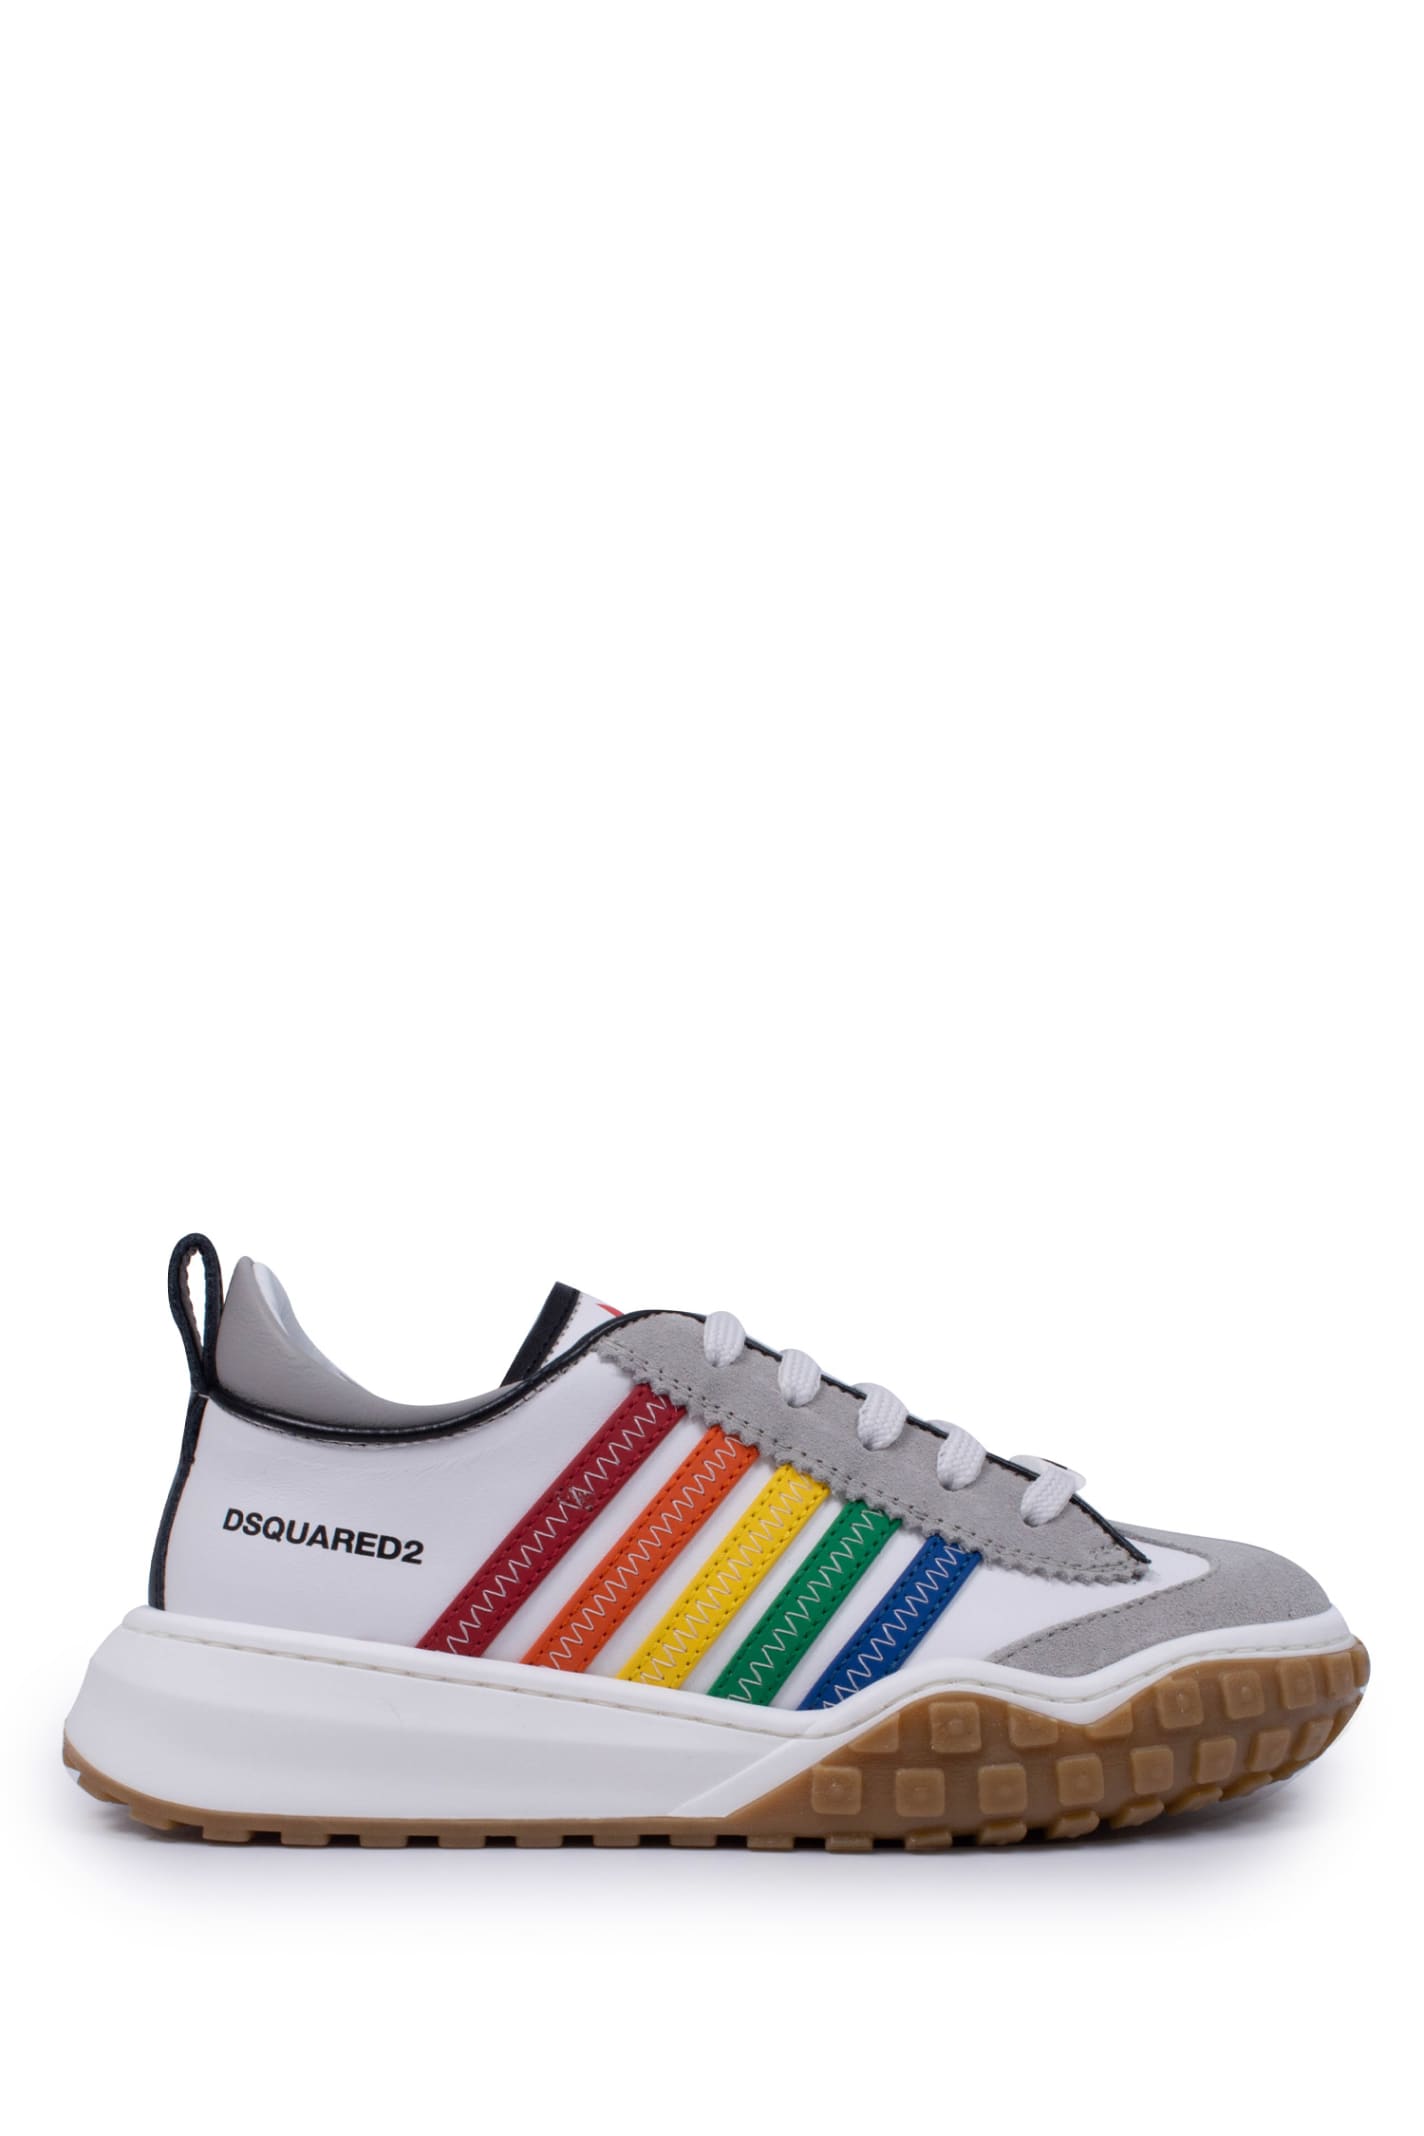 Dsquared2 Rainbow Logo Leather Lace-up Sneakers